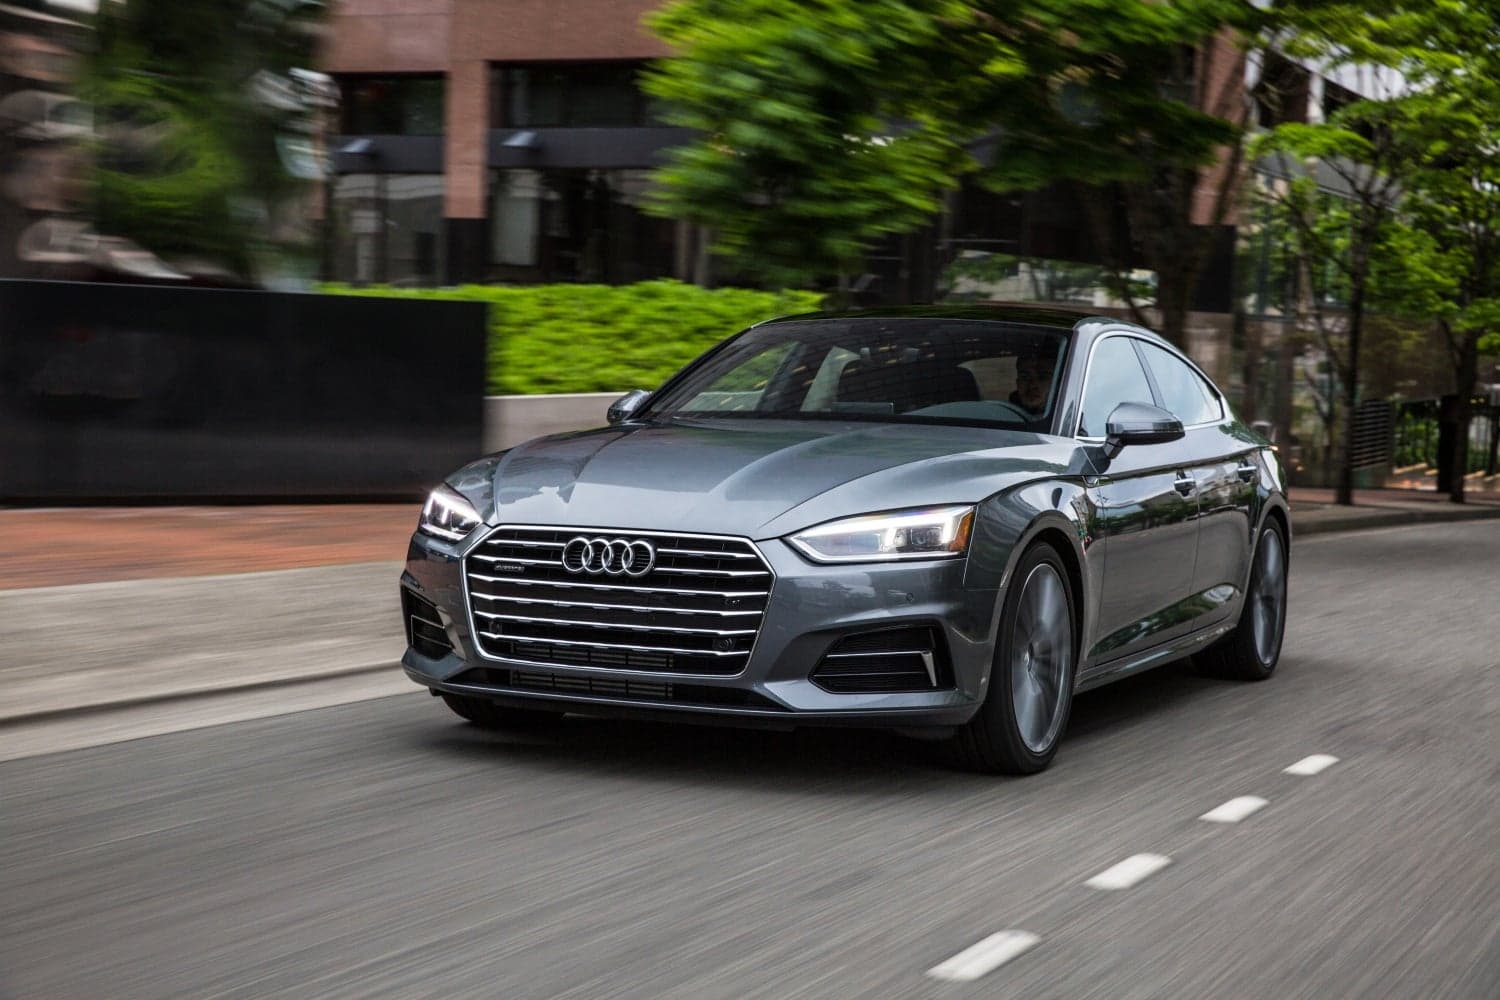 Audi Outclasses Field with IIHS Top Safety Picks